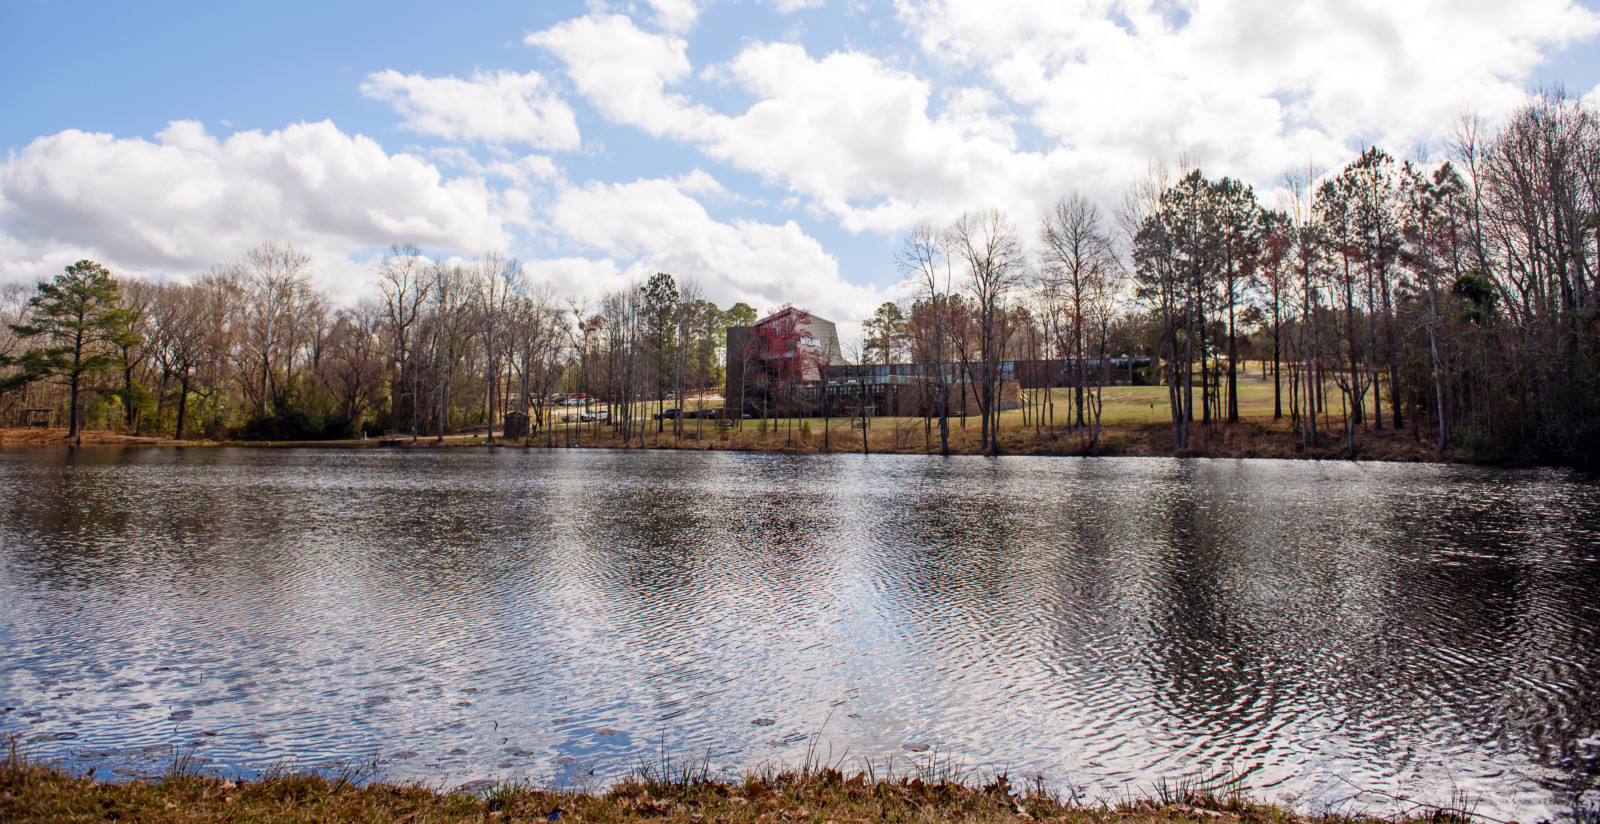 The main building at Sandhill REC is pictured from across the pond behind it.